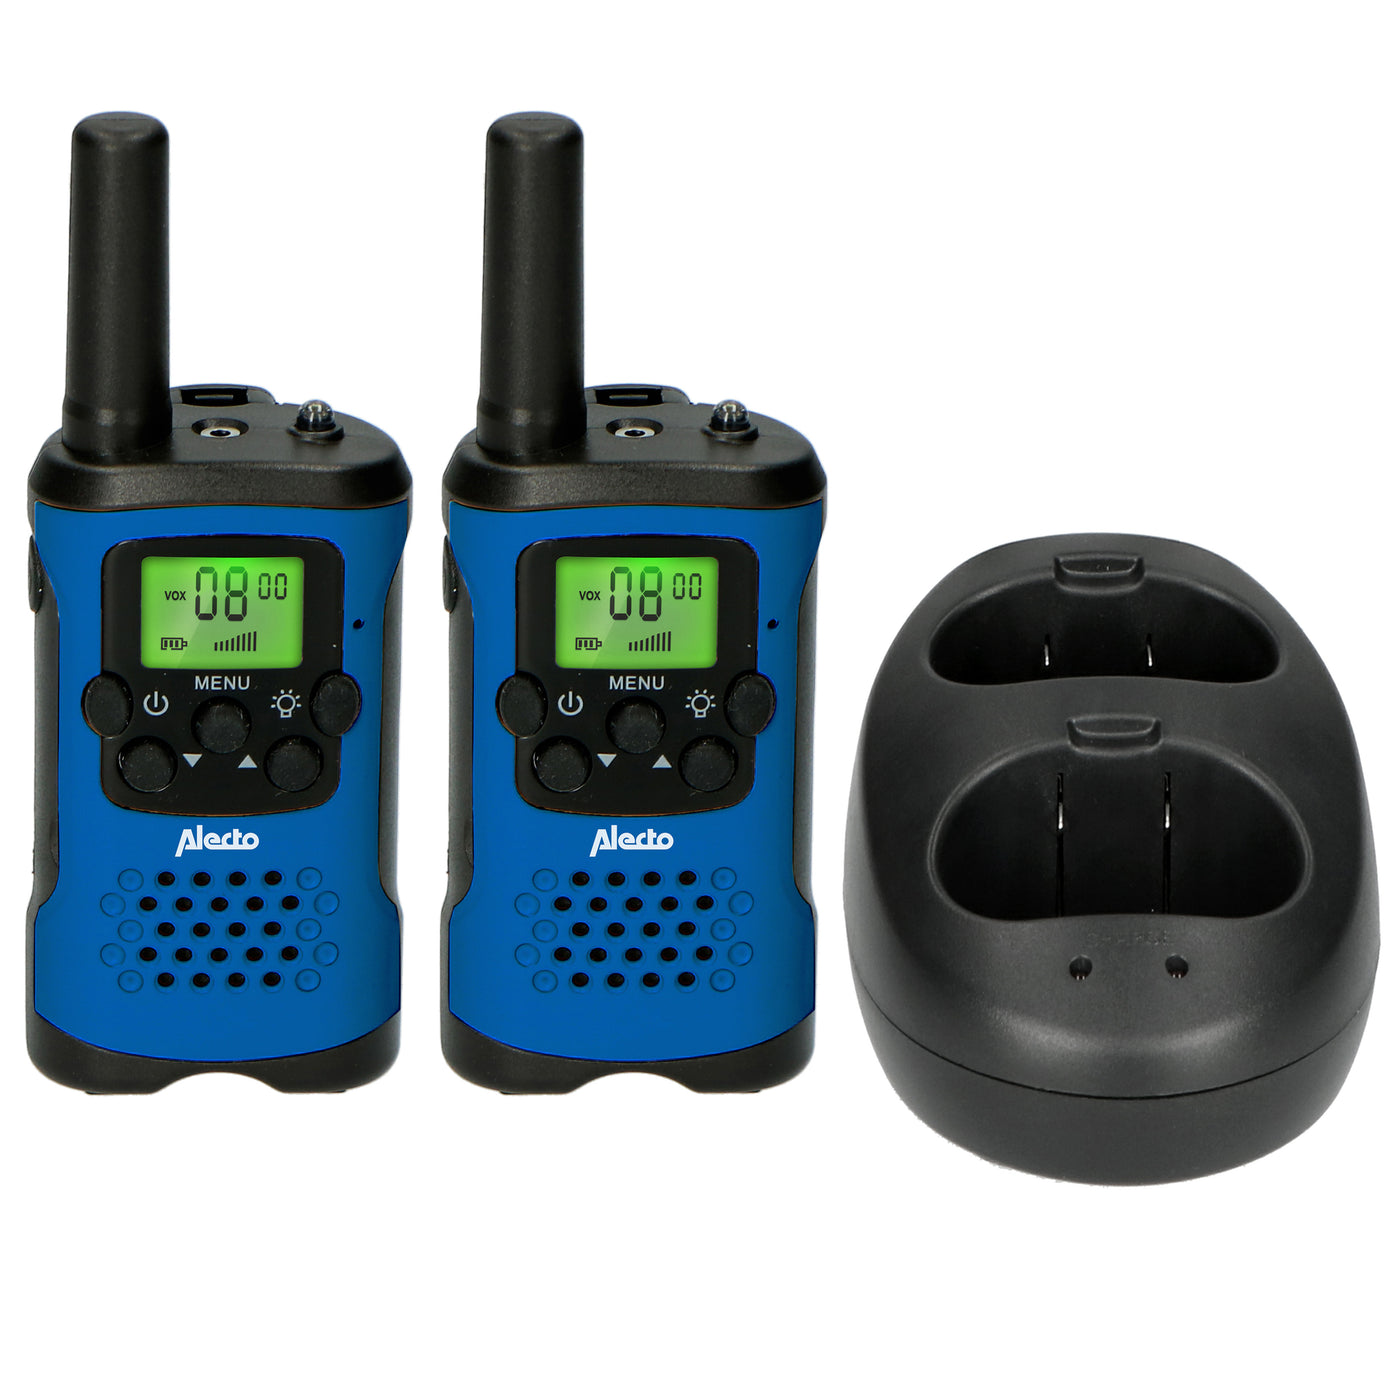 Alecto FR-175BW - Set of two Two-Way radios, range up to 7 kilometers, blue/black